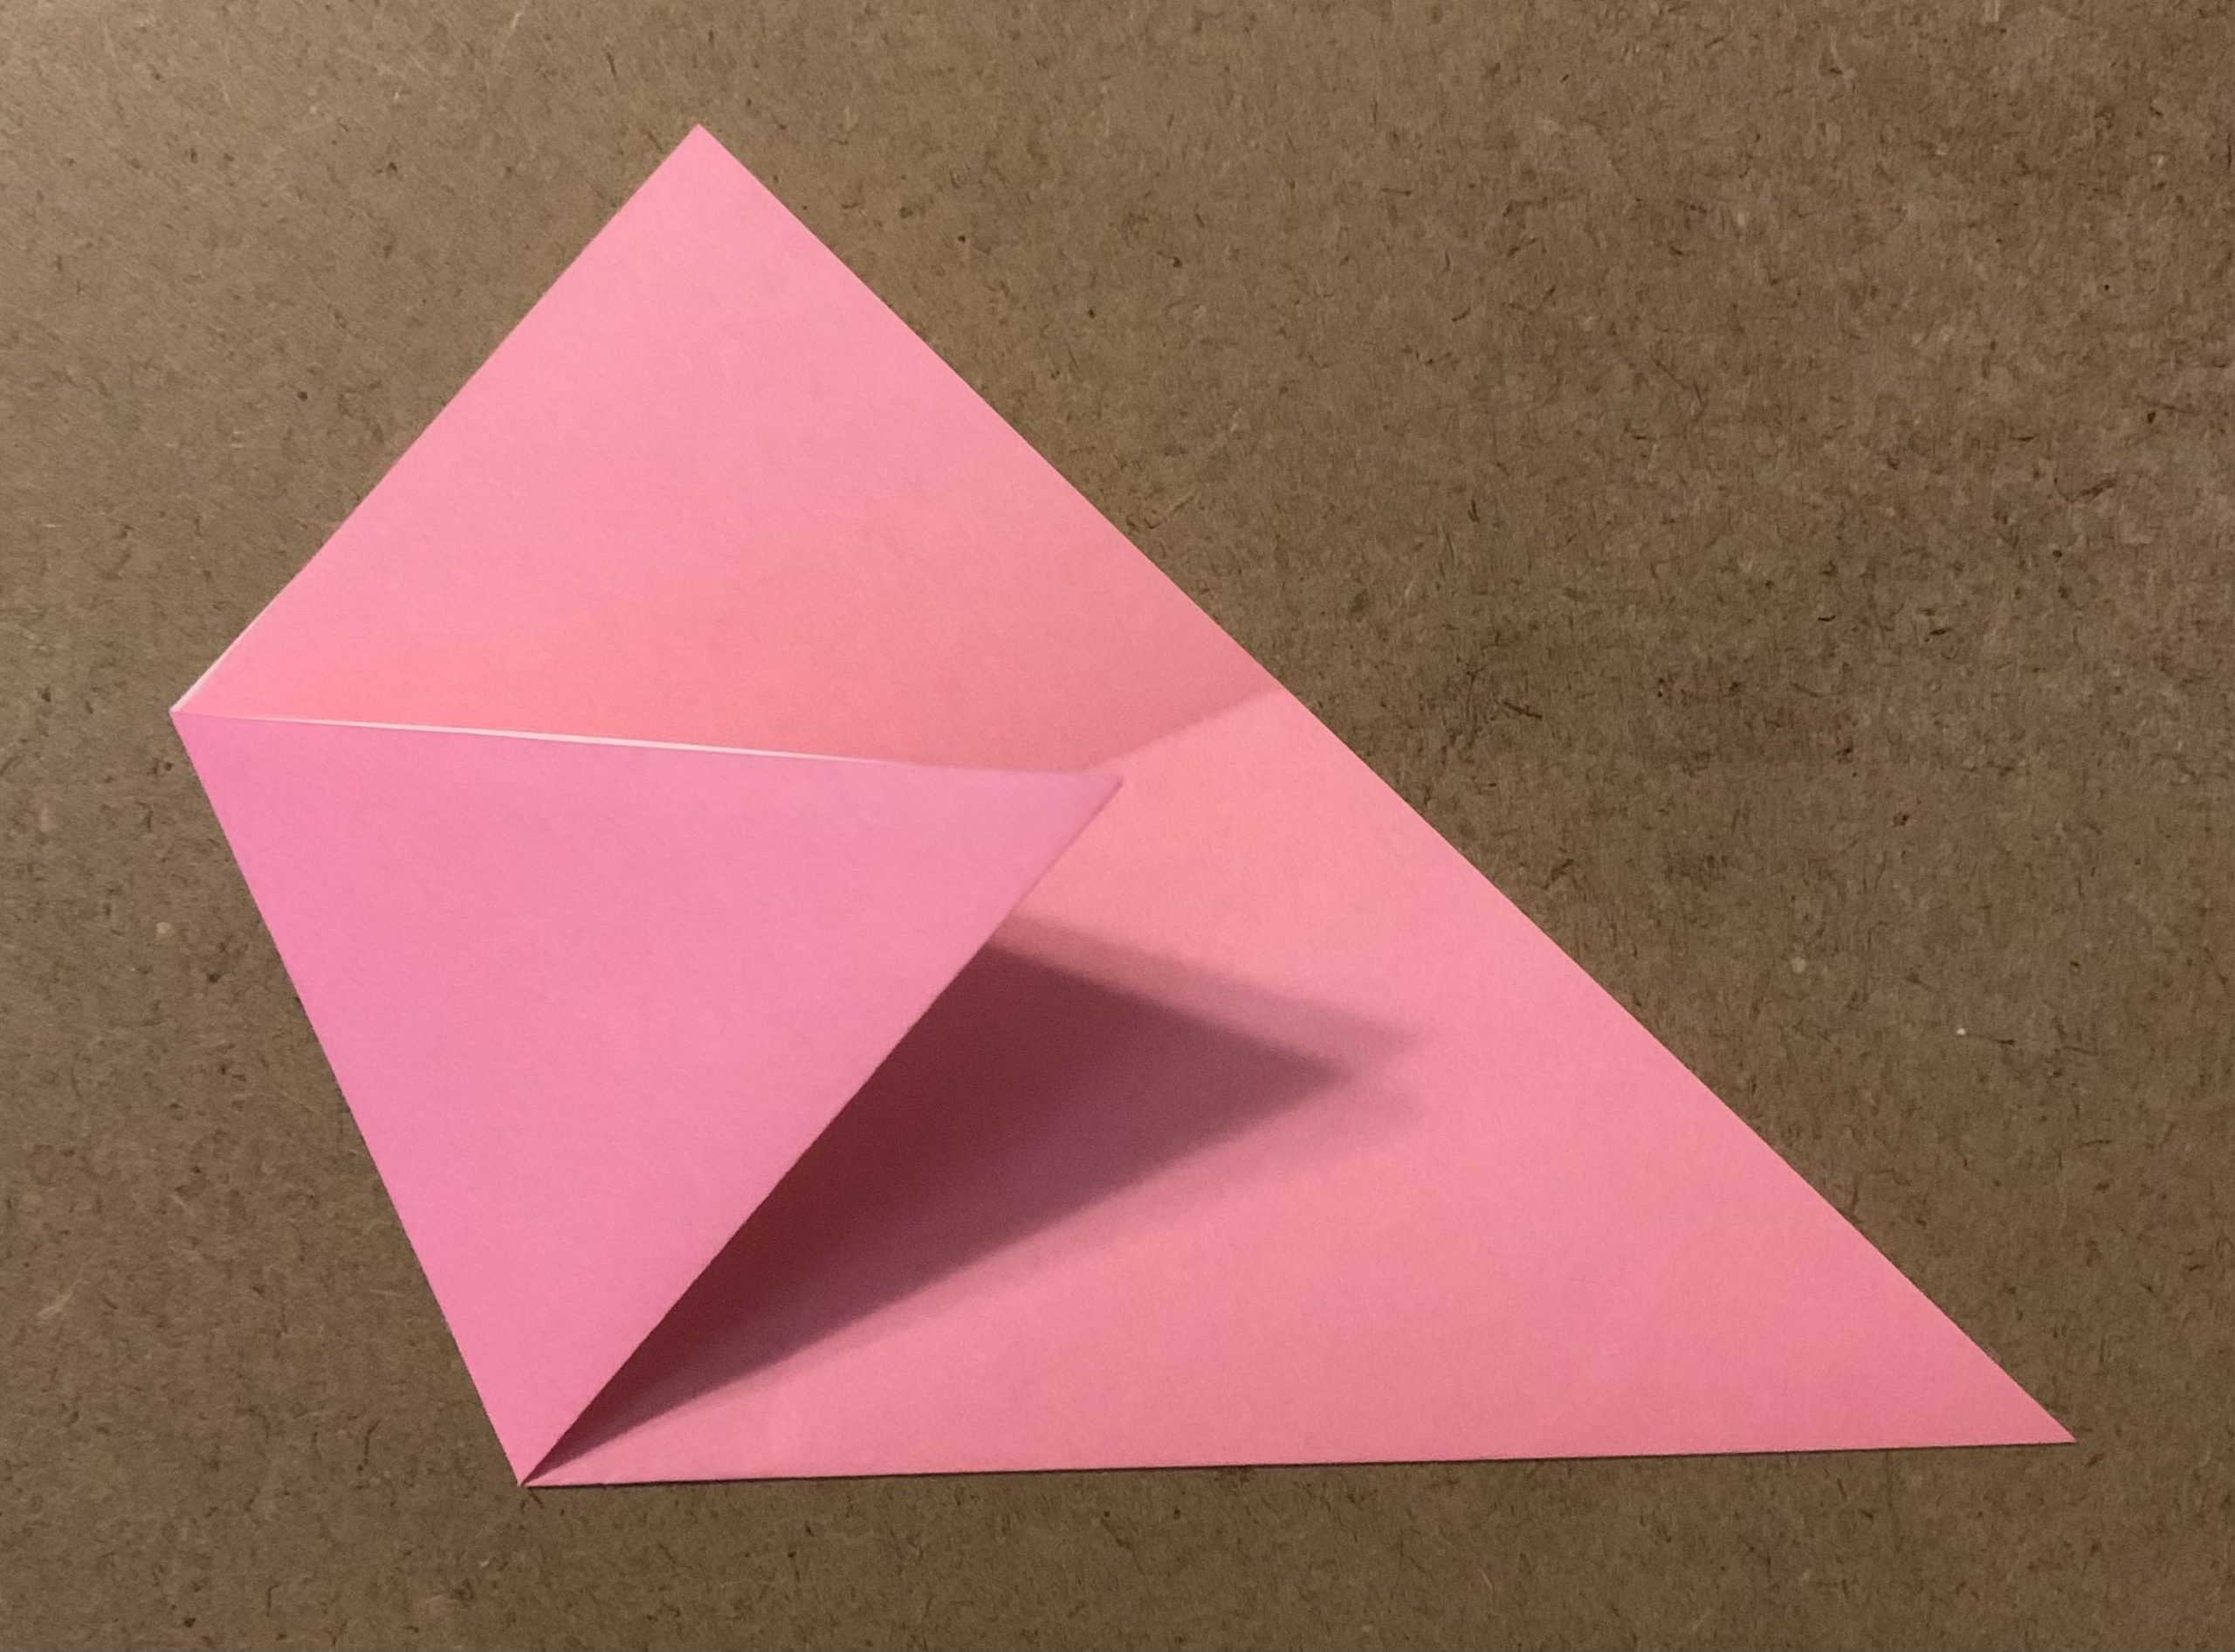 bottom left point of triangle is folded to the center of the right side